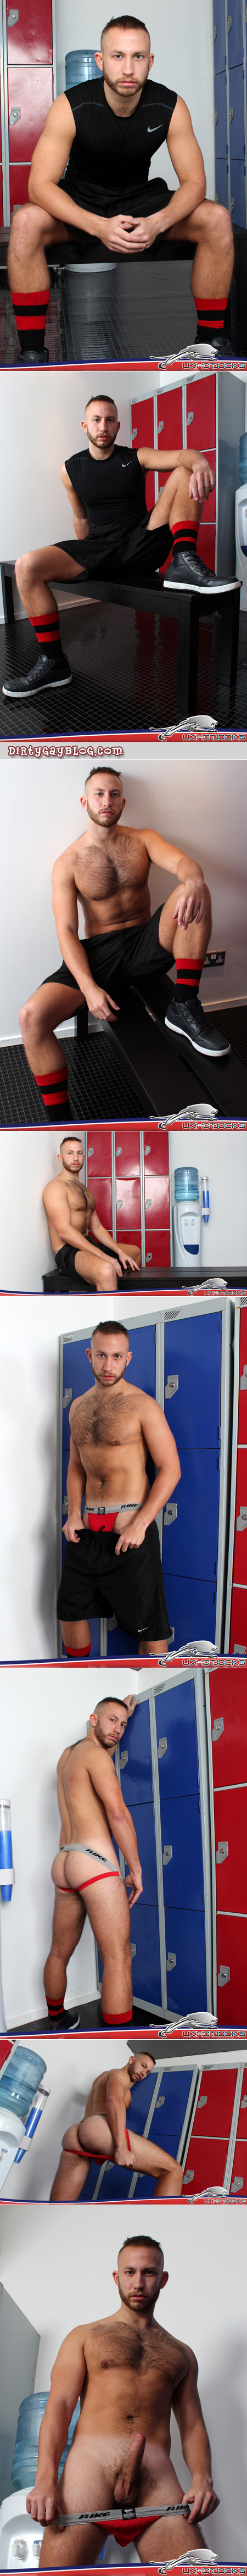 Furry cub stripping down to his jock in the locker room.